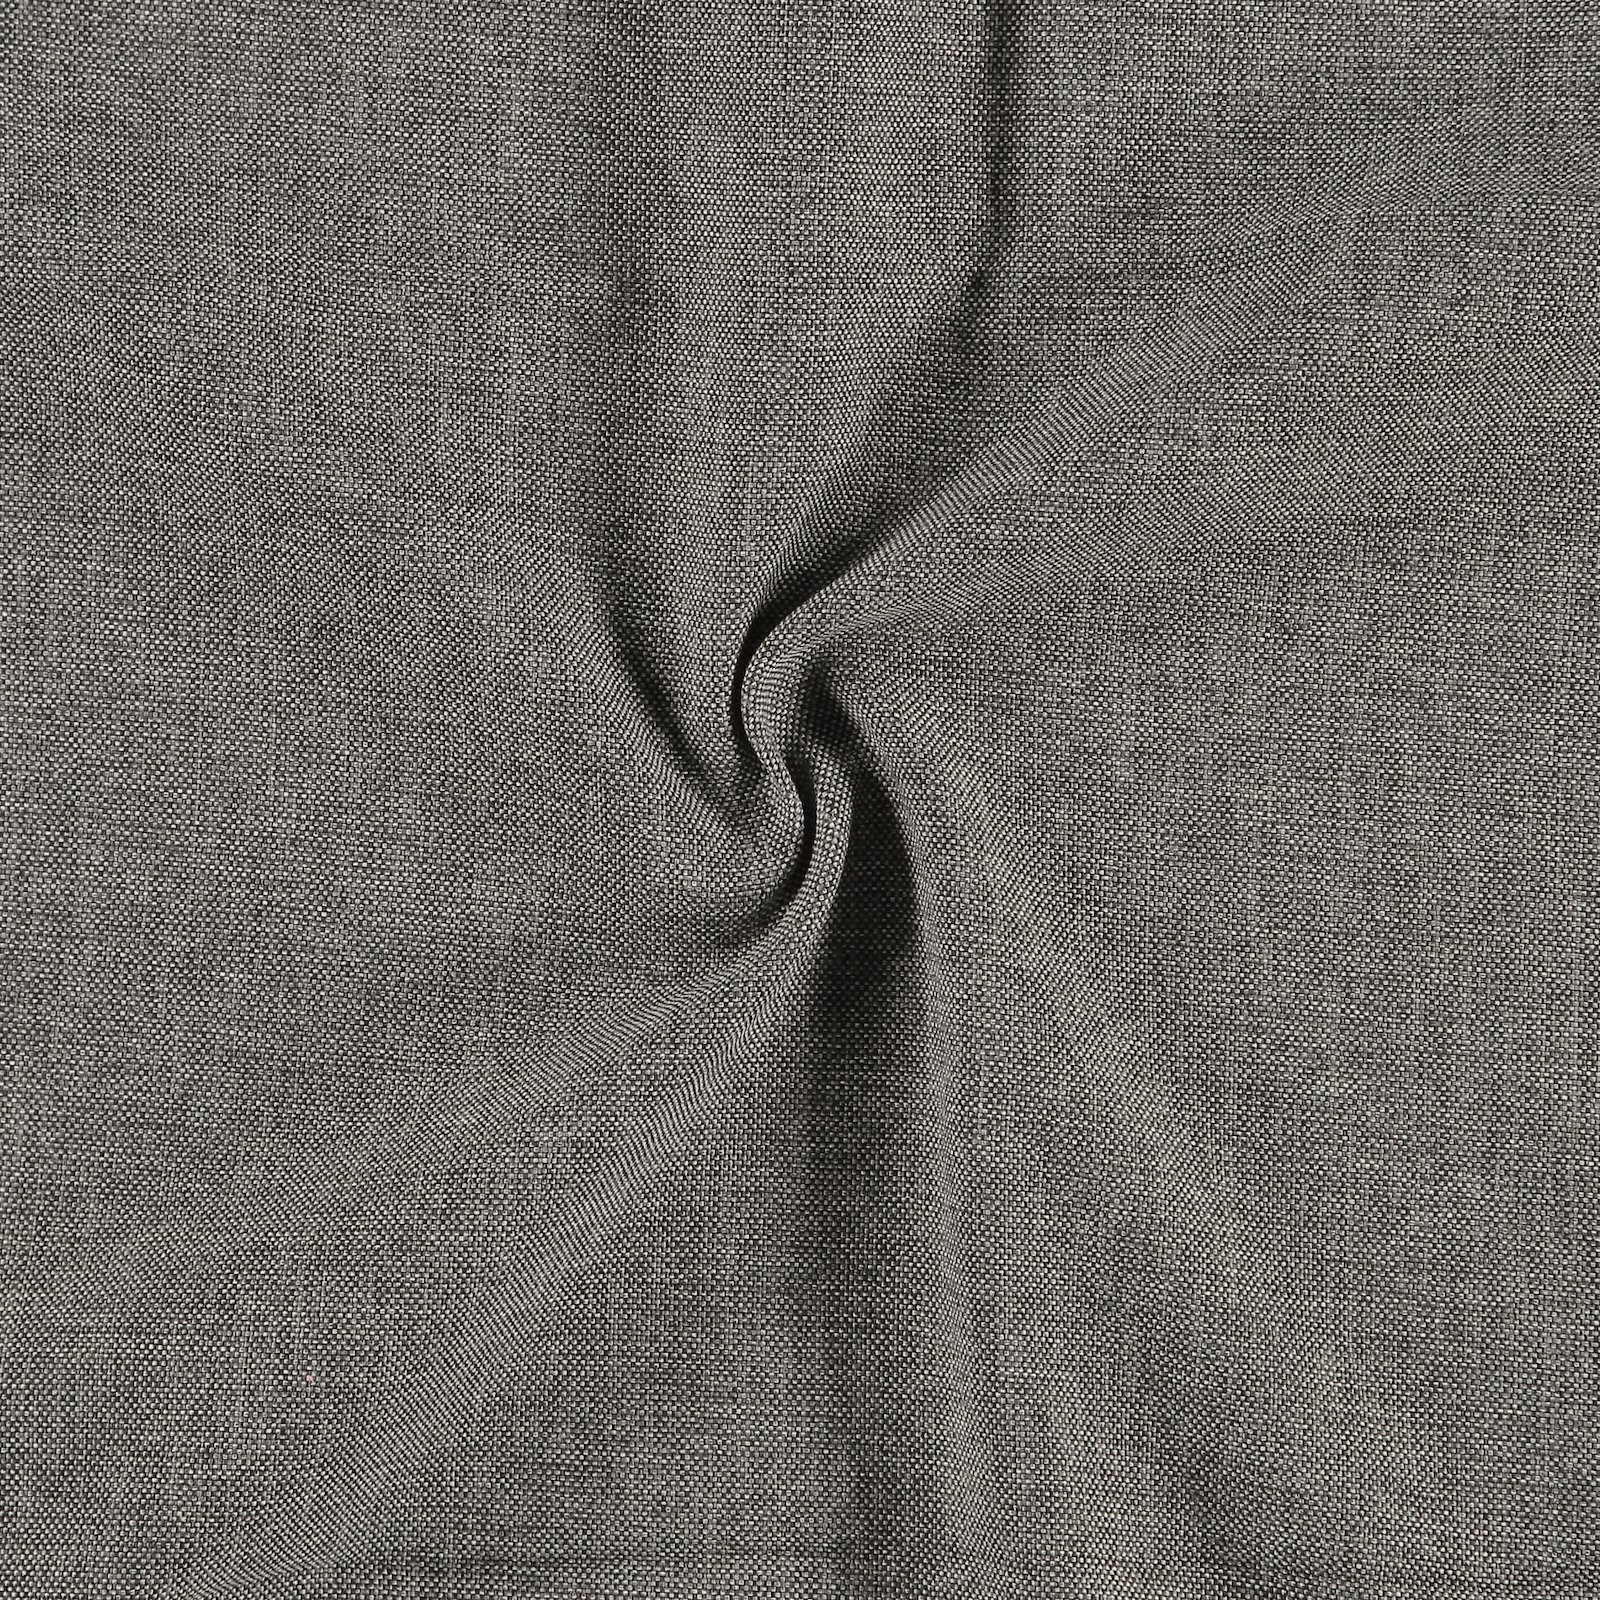 Upholstery texture grey/light grey 822163_pack